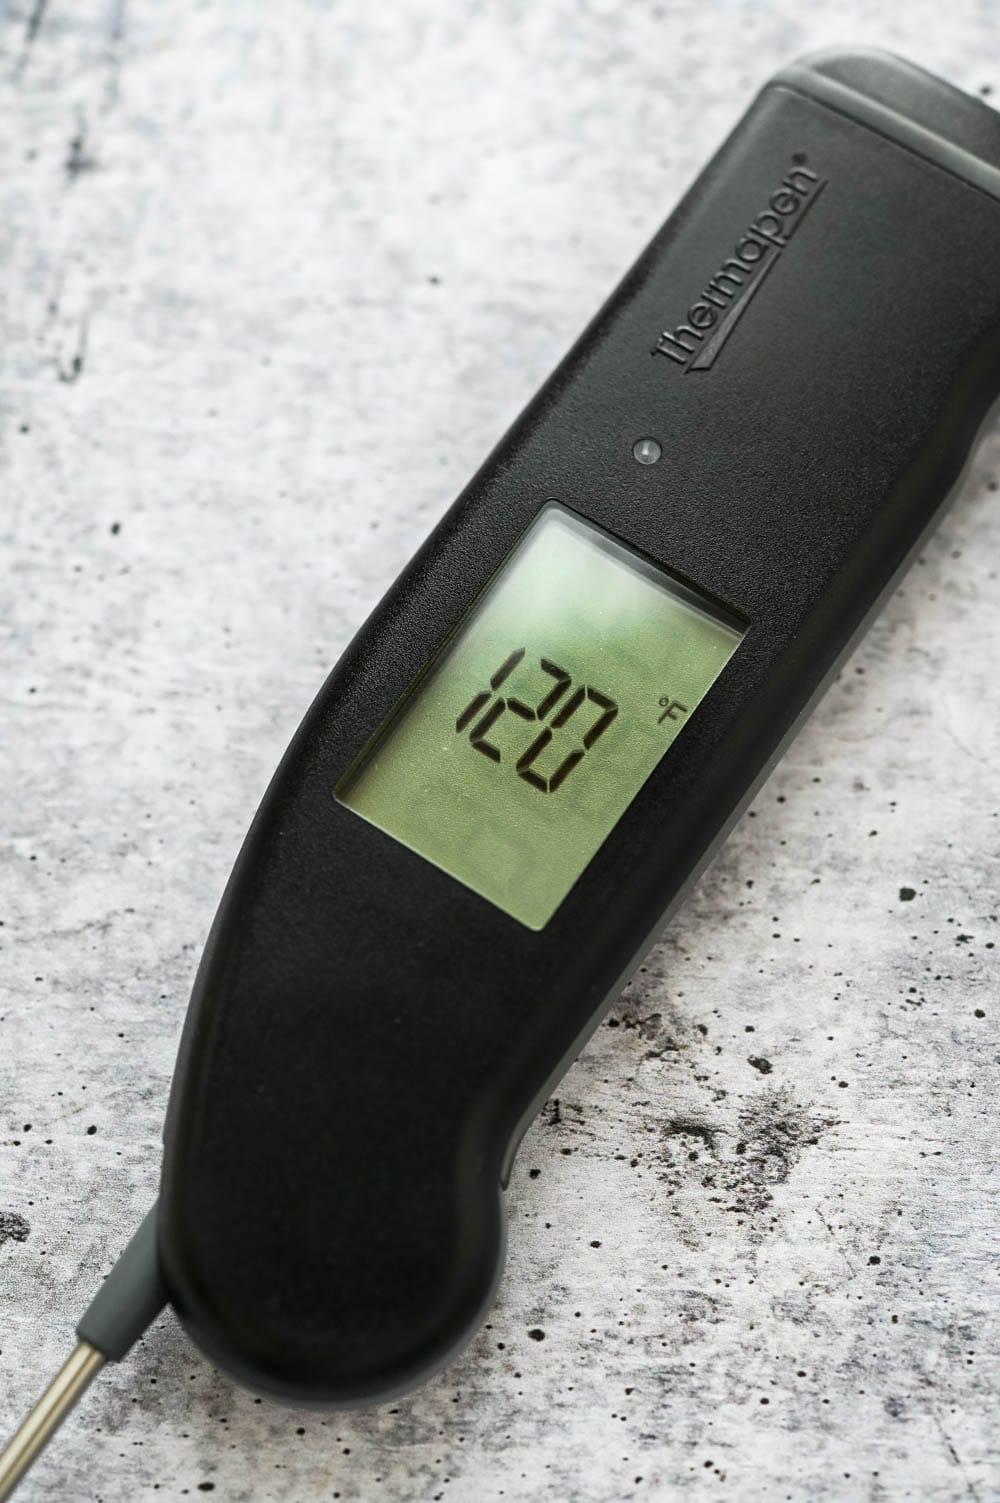 A digital read thermometer so you know when the meat is done.